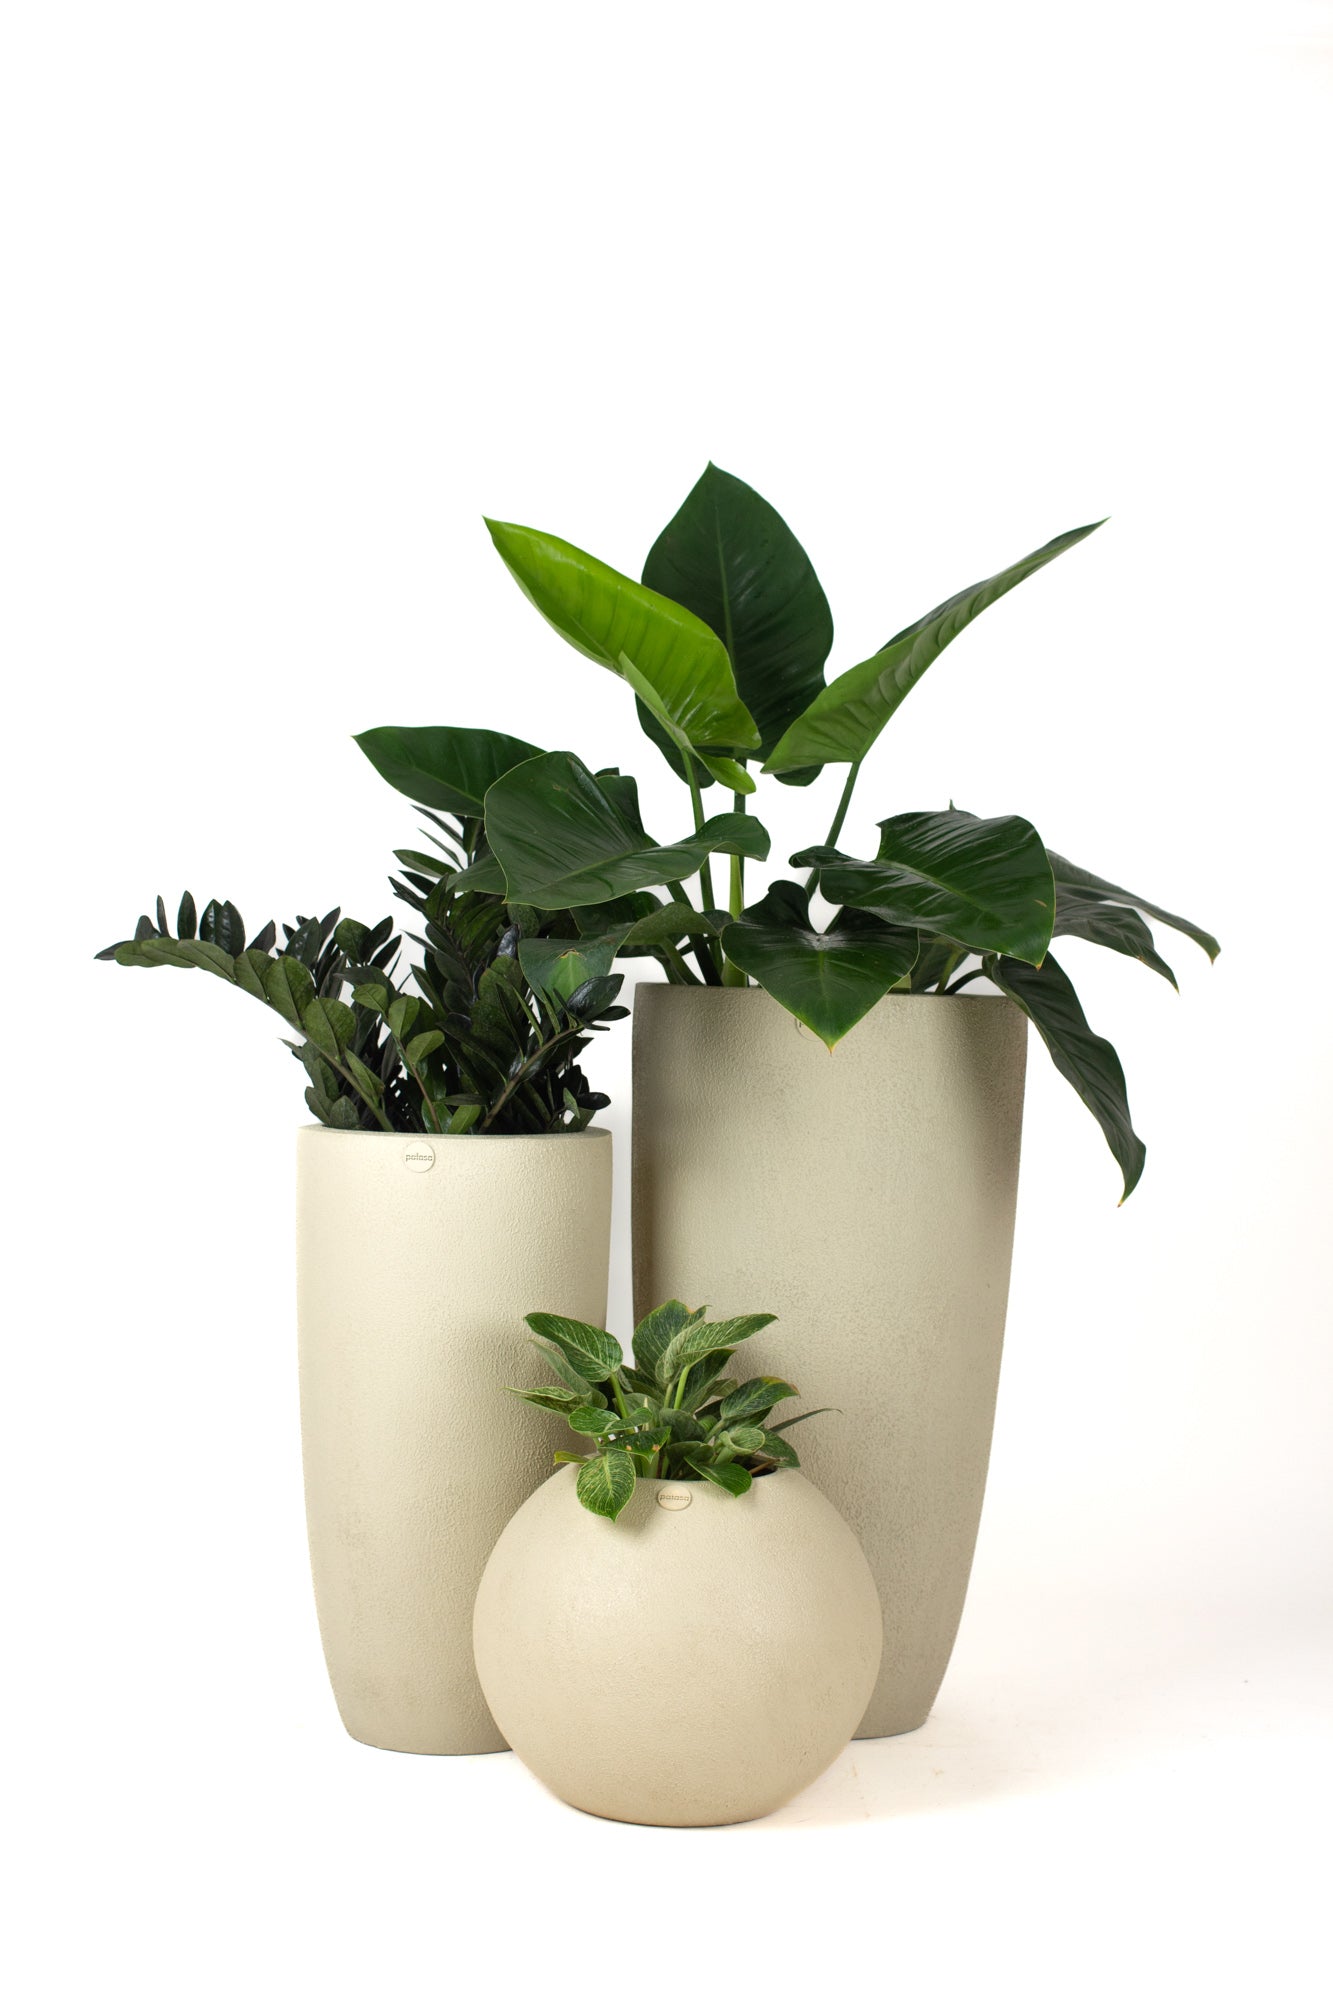 This set of three FRP planters by Palasa is sure to create a lovely corner in your balcony or indoor area. The beige tall planters pots are perfect for your balcony garden or living room. Buy living room planters today at Palasa